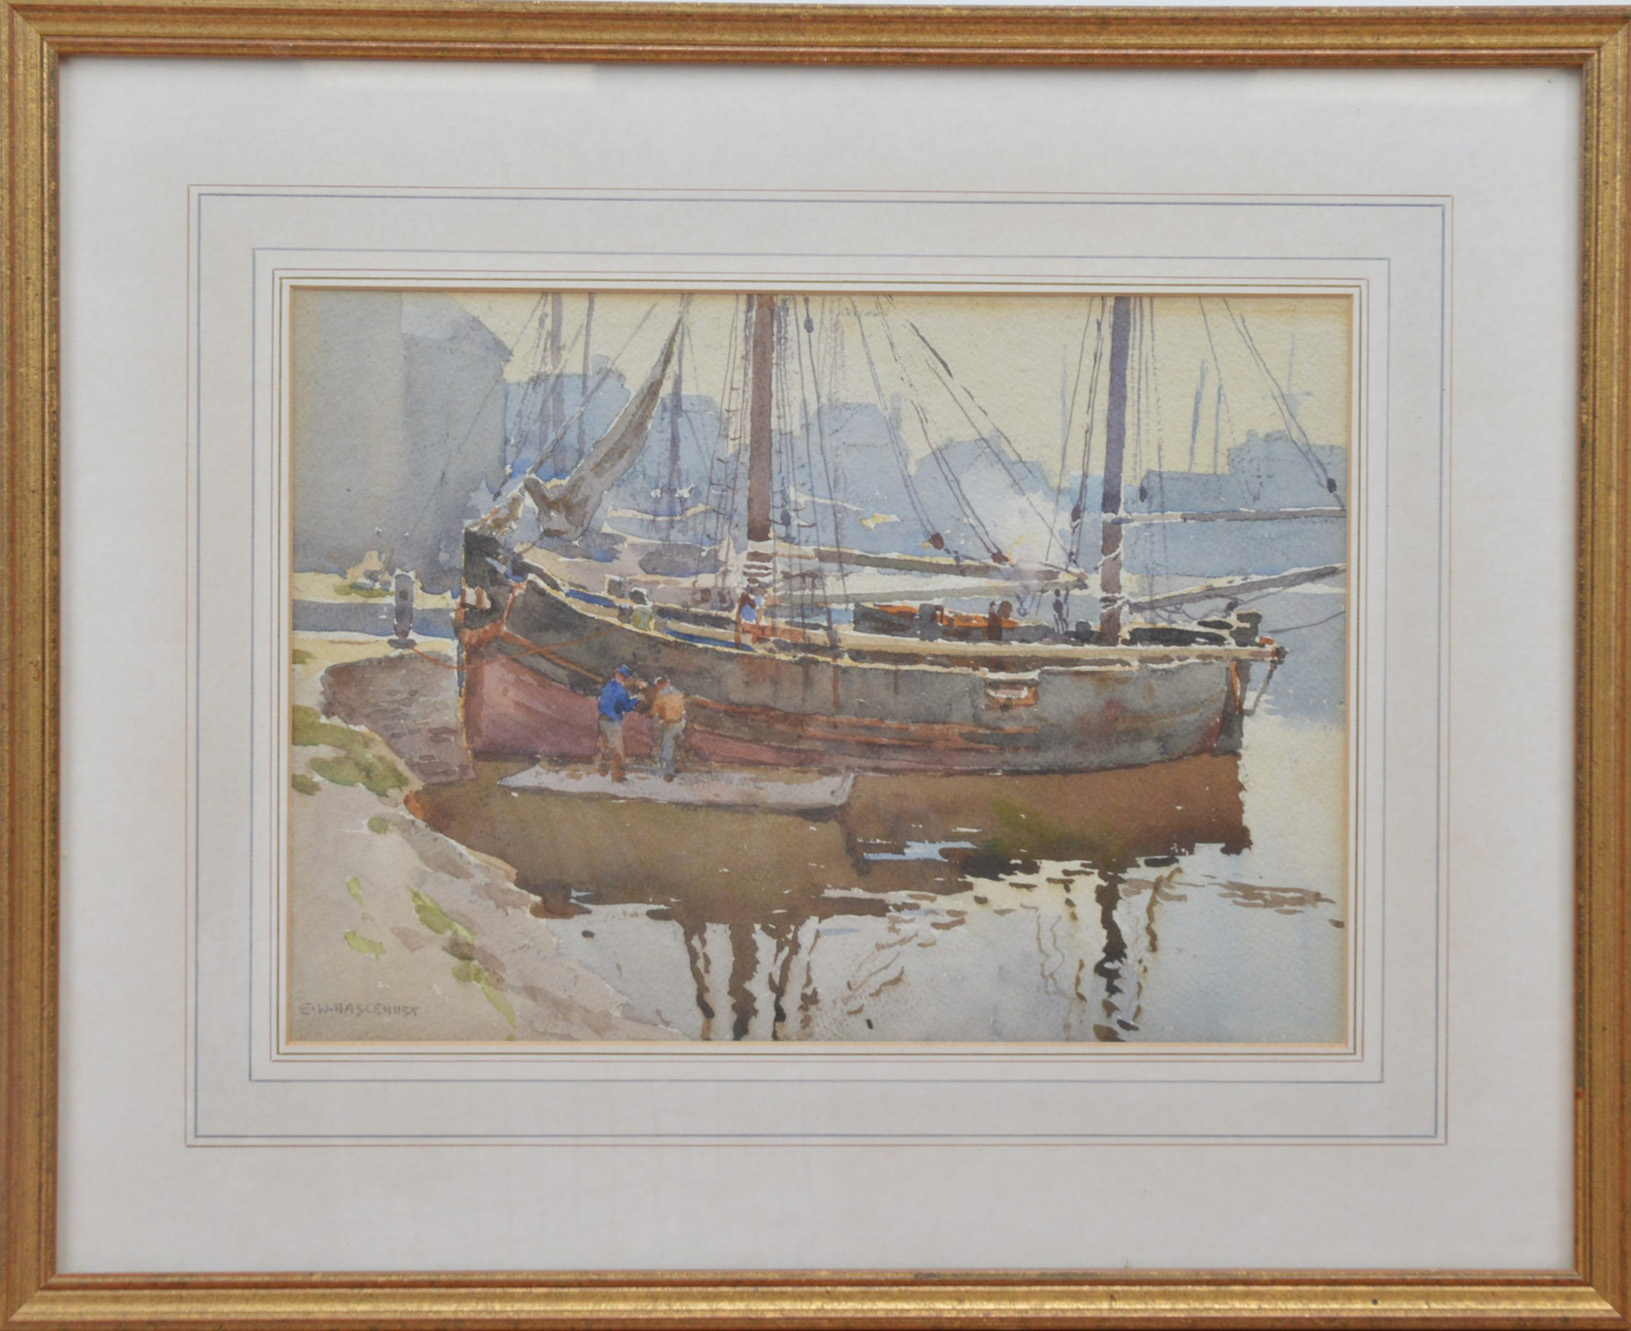 Ernest William Haslehurst (British 1866-1949), a boat in a harbour, watercolour on paper, signed